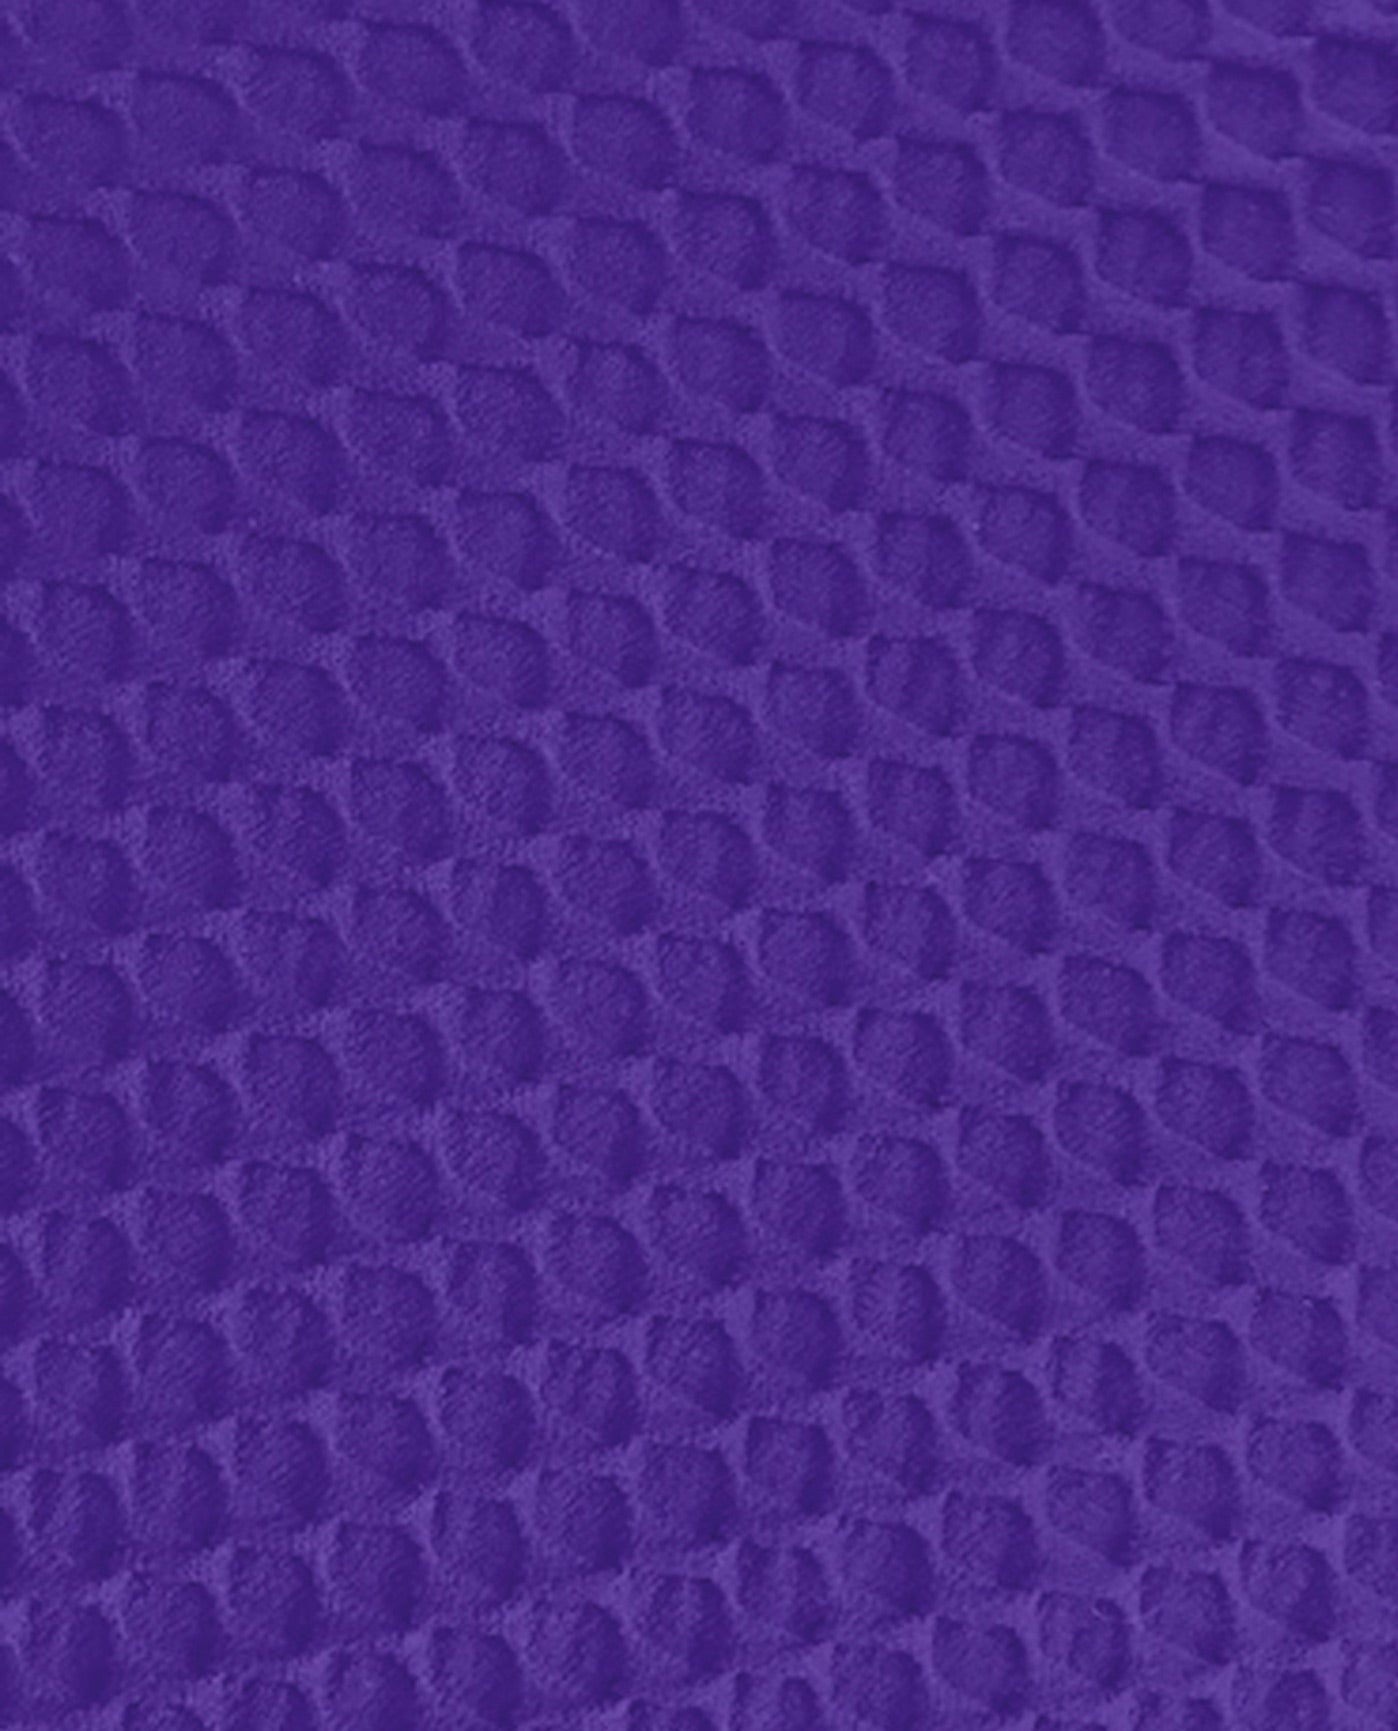 FABRIC SWATCH VIEW OF CHLORINE RESISTANT AQUAMORE SOLID TEXTURED CROSS BACK PLUS SIZE SWIMSUIT | 510 AQT TEXTURED PURPLE